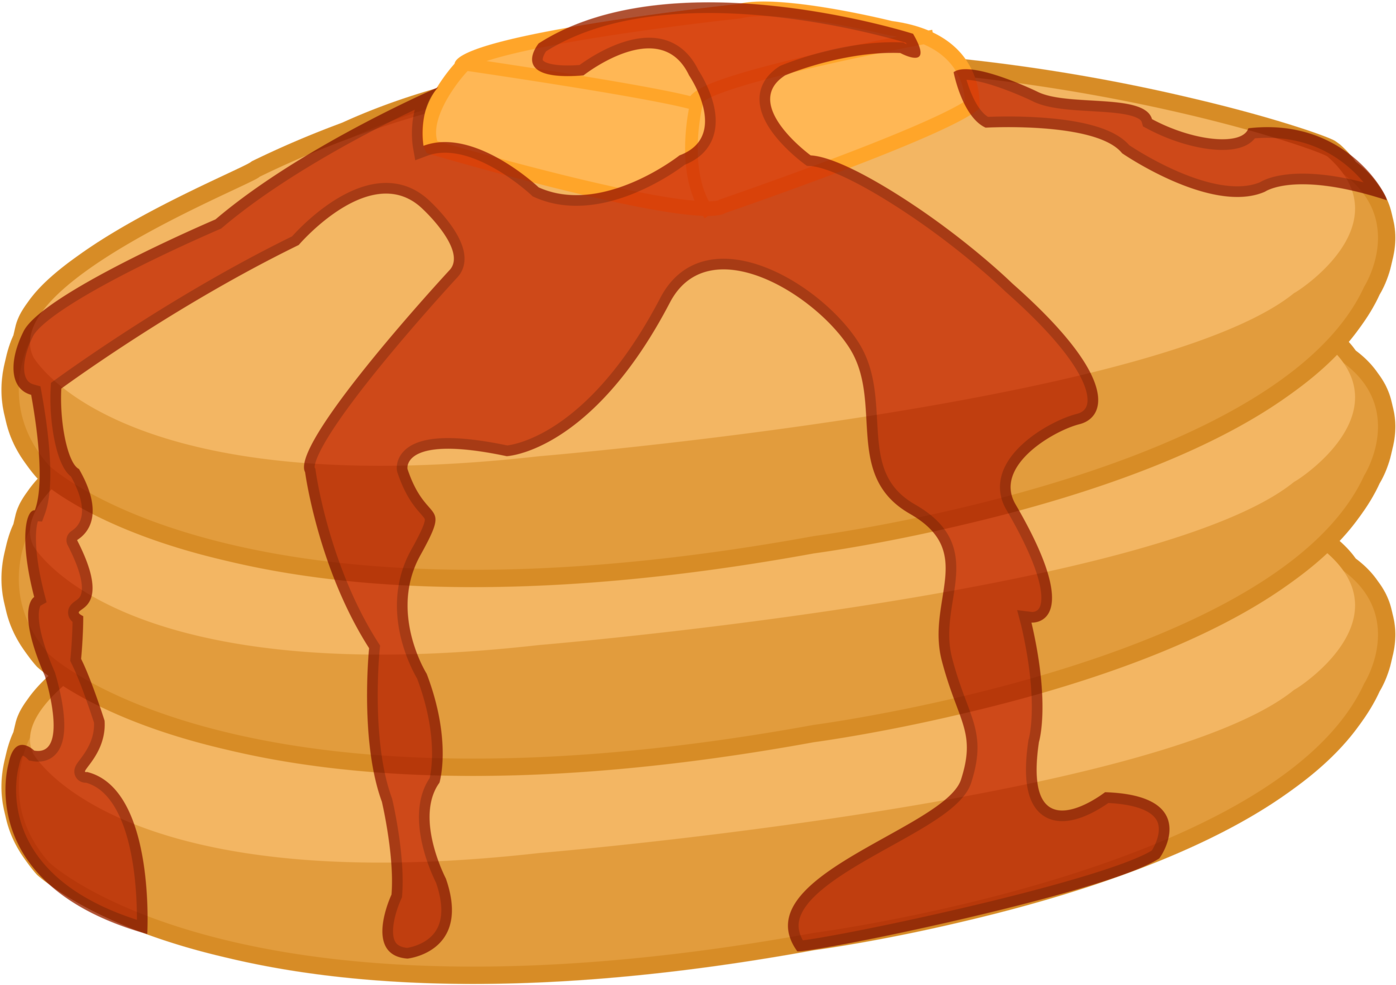 A Food With Syrup On It